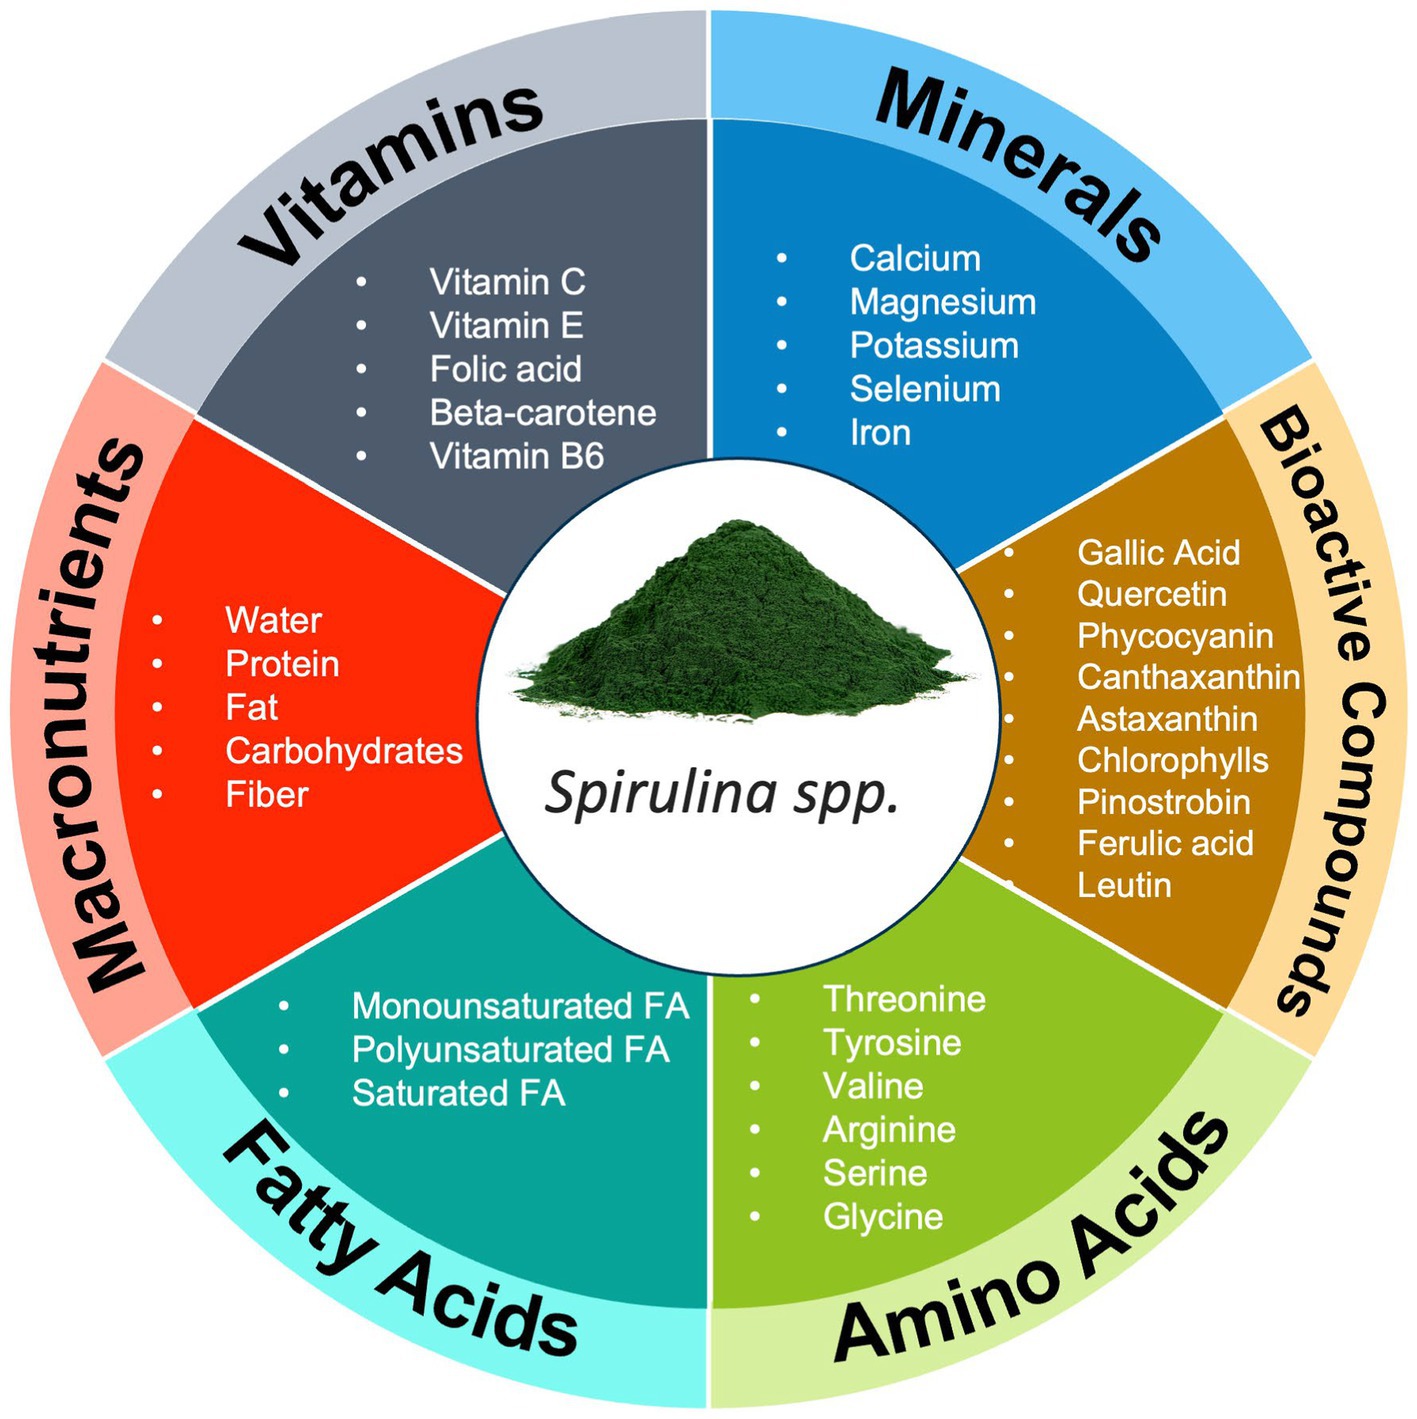 Frontiers | Nutrient synergy: definition, evidence, and future